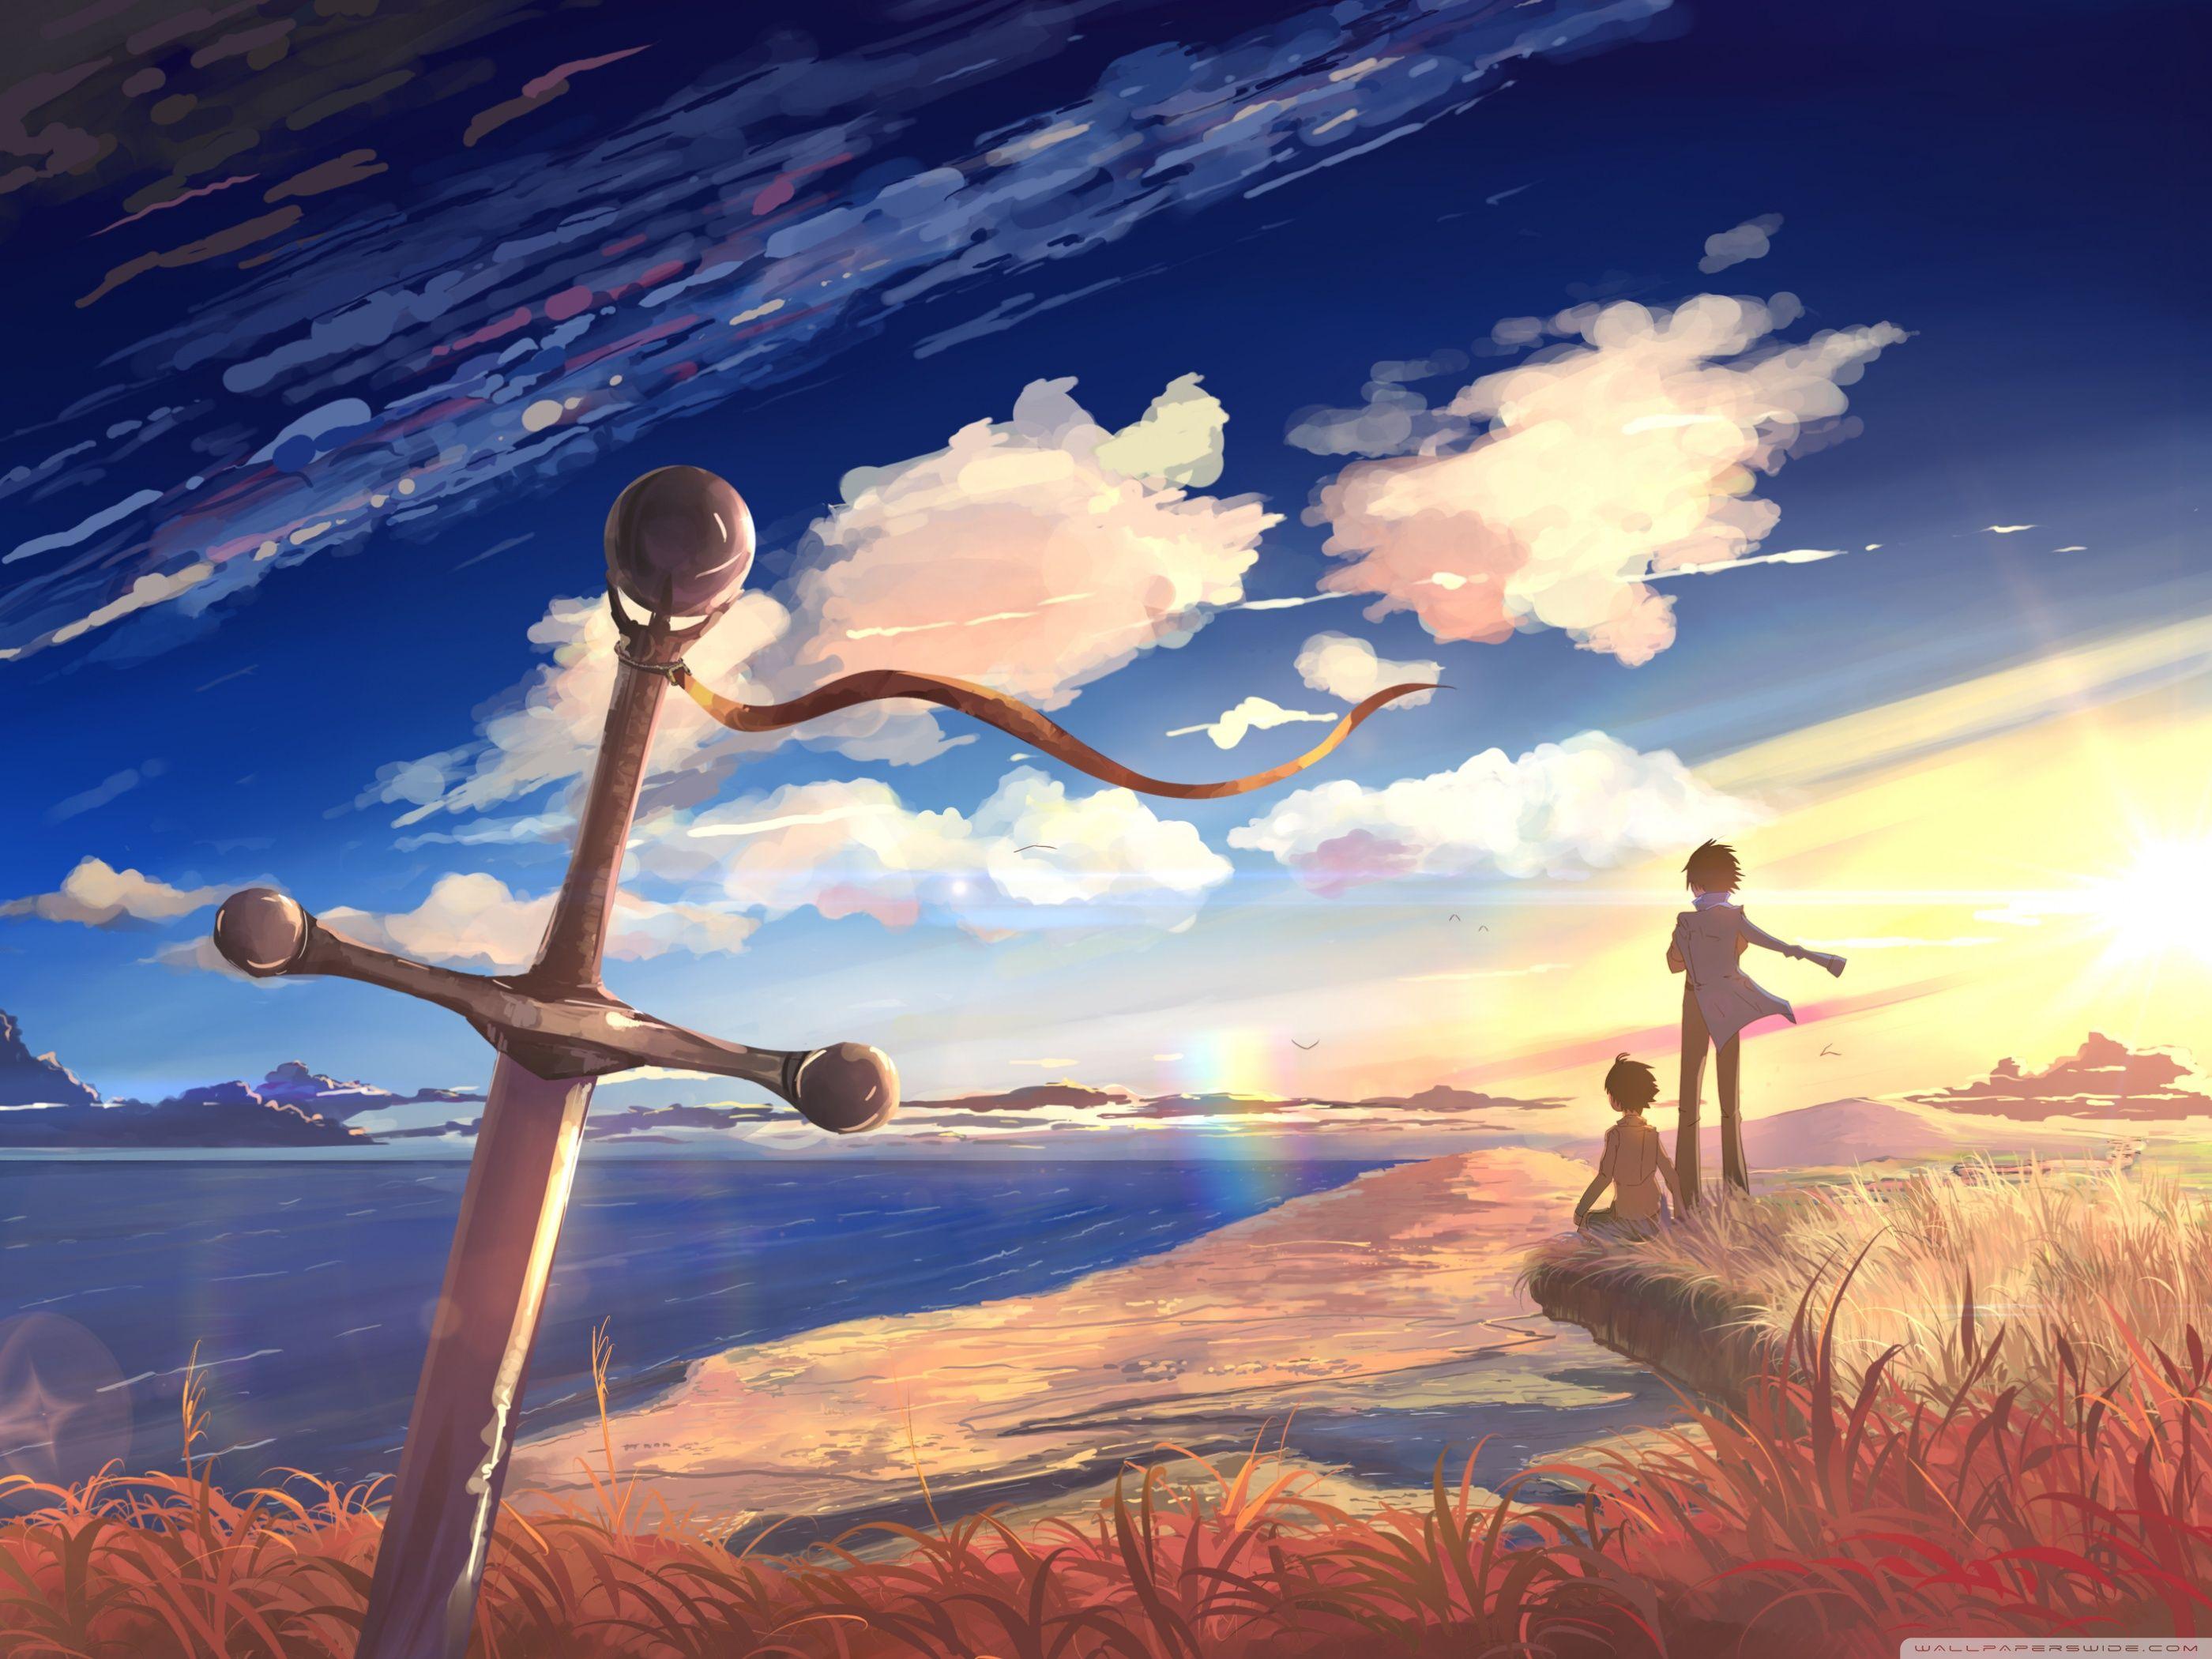 Small Fresh Anime Scene Hd Background Wallpaper Image For Free Download   Pngtree